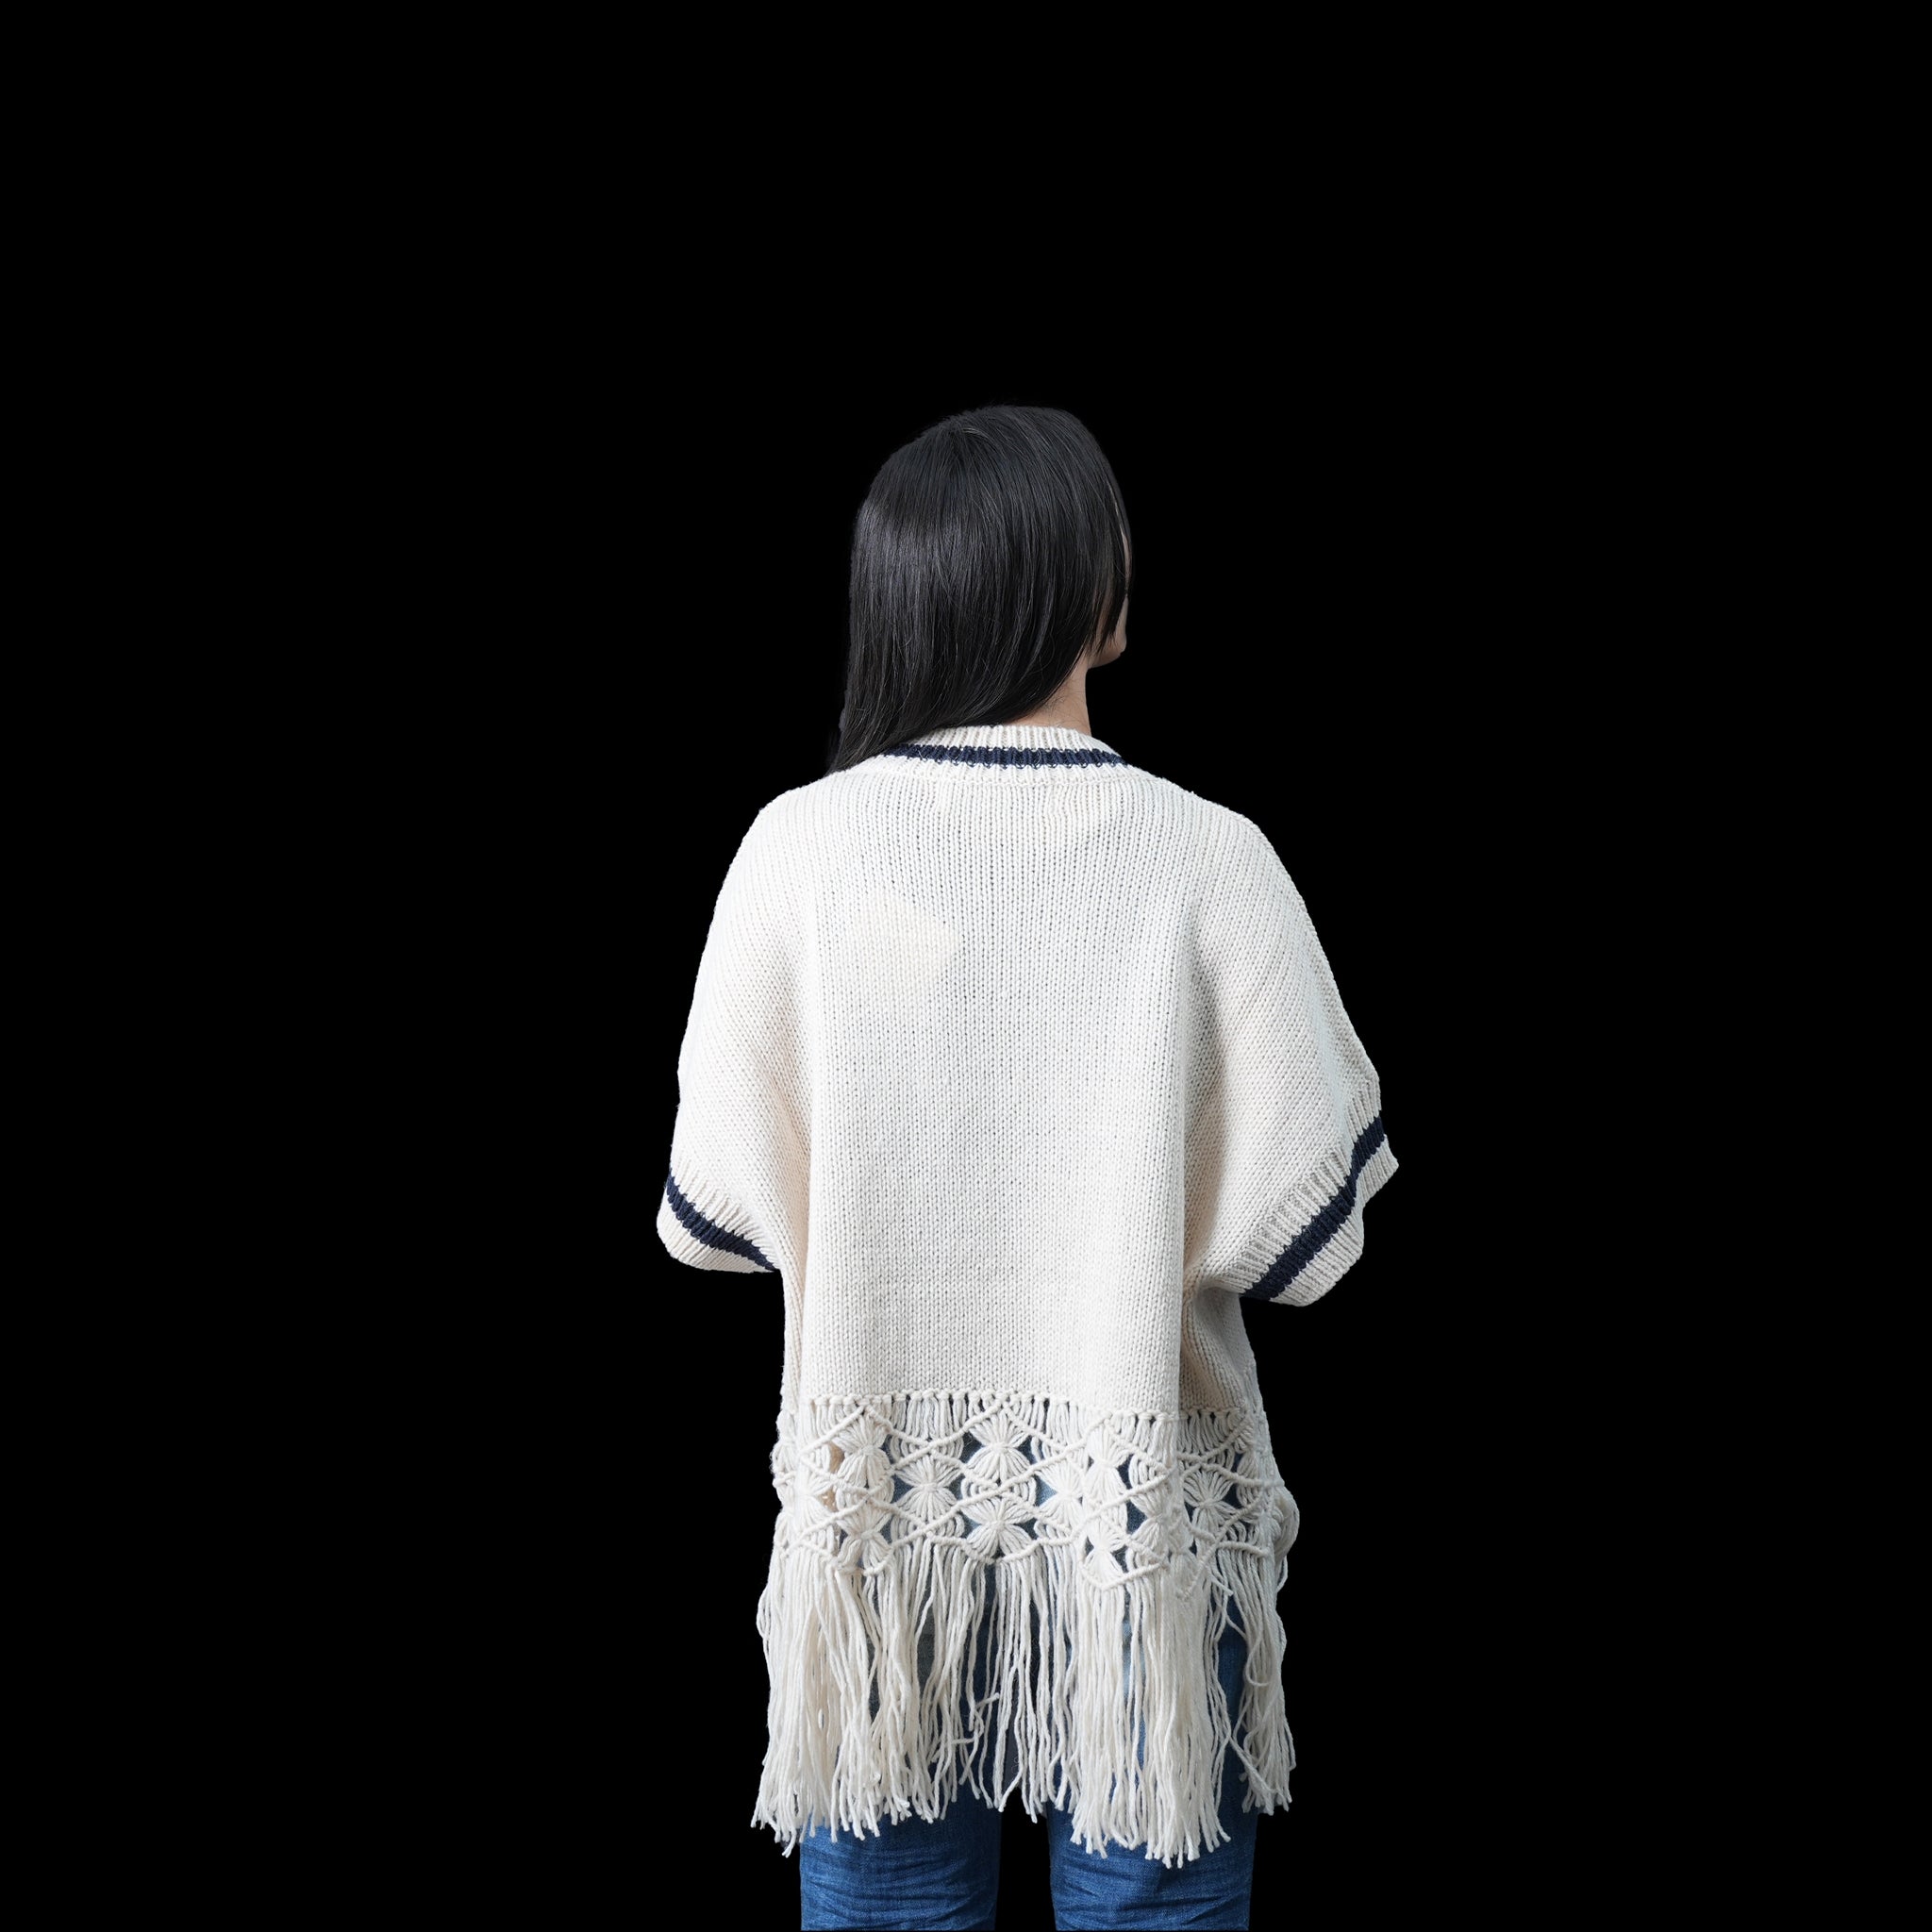 No:bsd23AW-19a | Name:Grandma's Knit Vest | Color:Off White【BEDSIDEDRAMA_ベッドサイドドラマ】